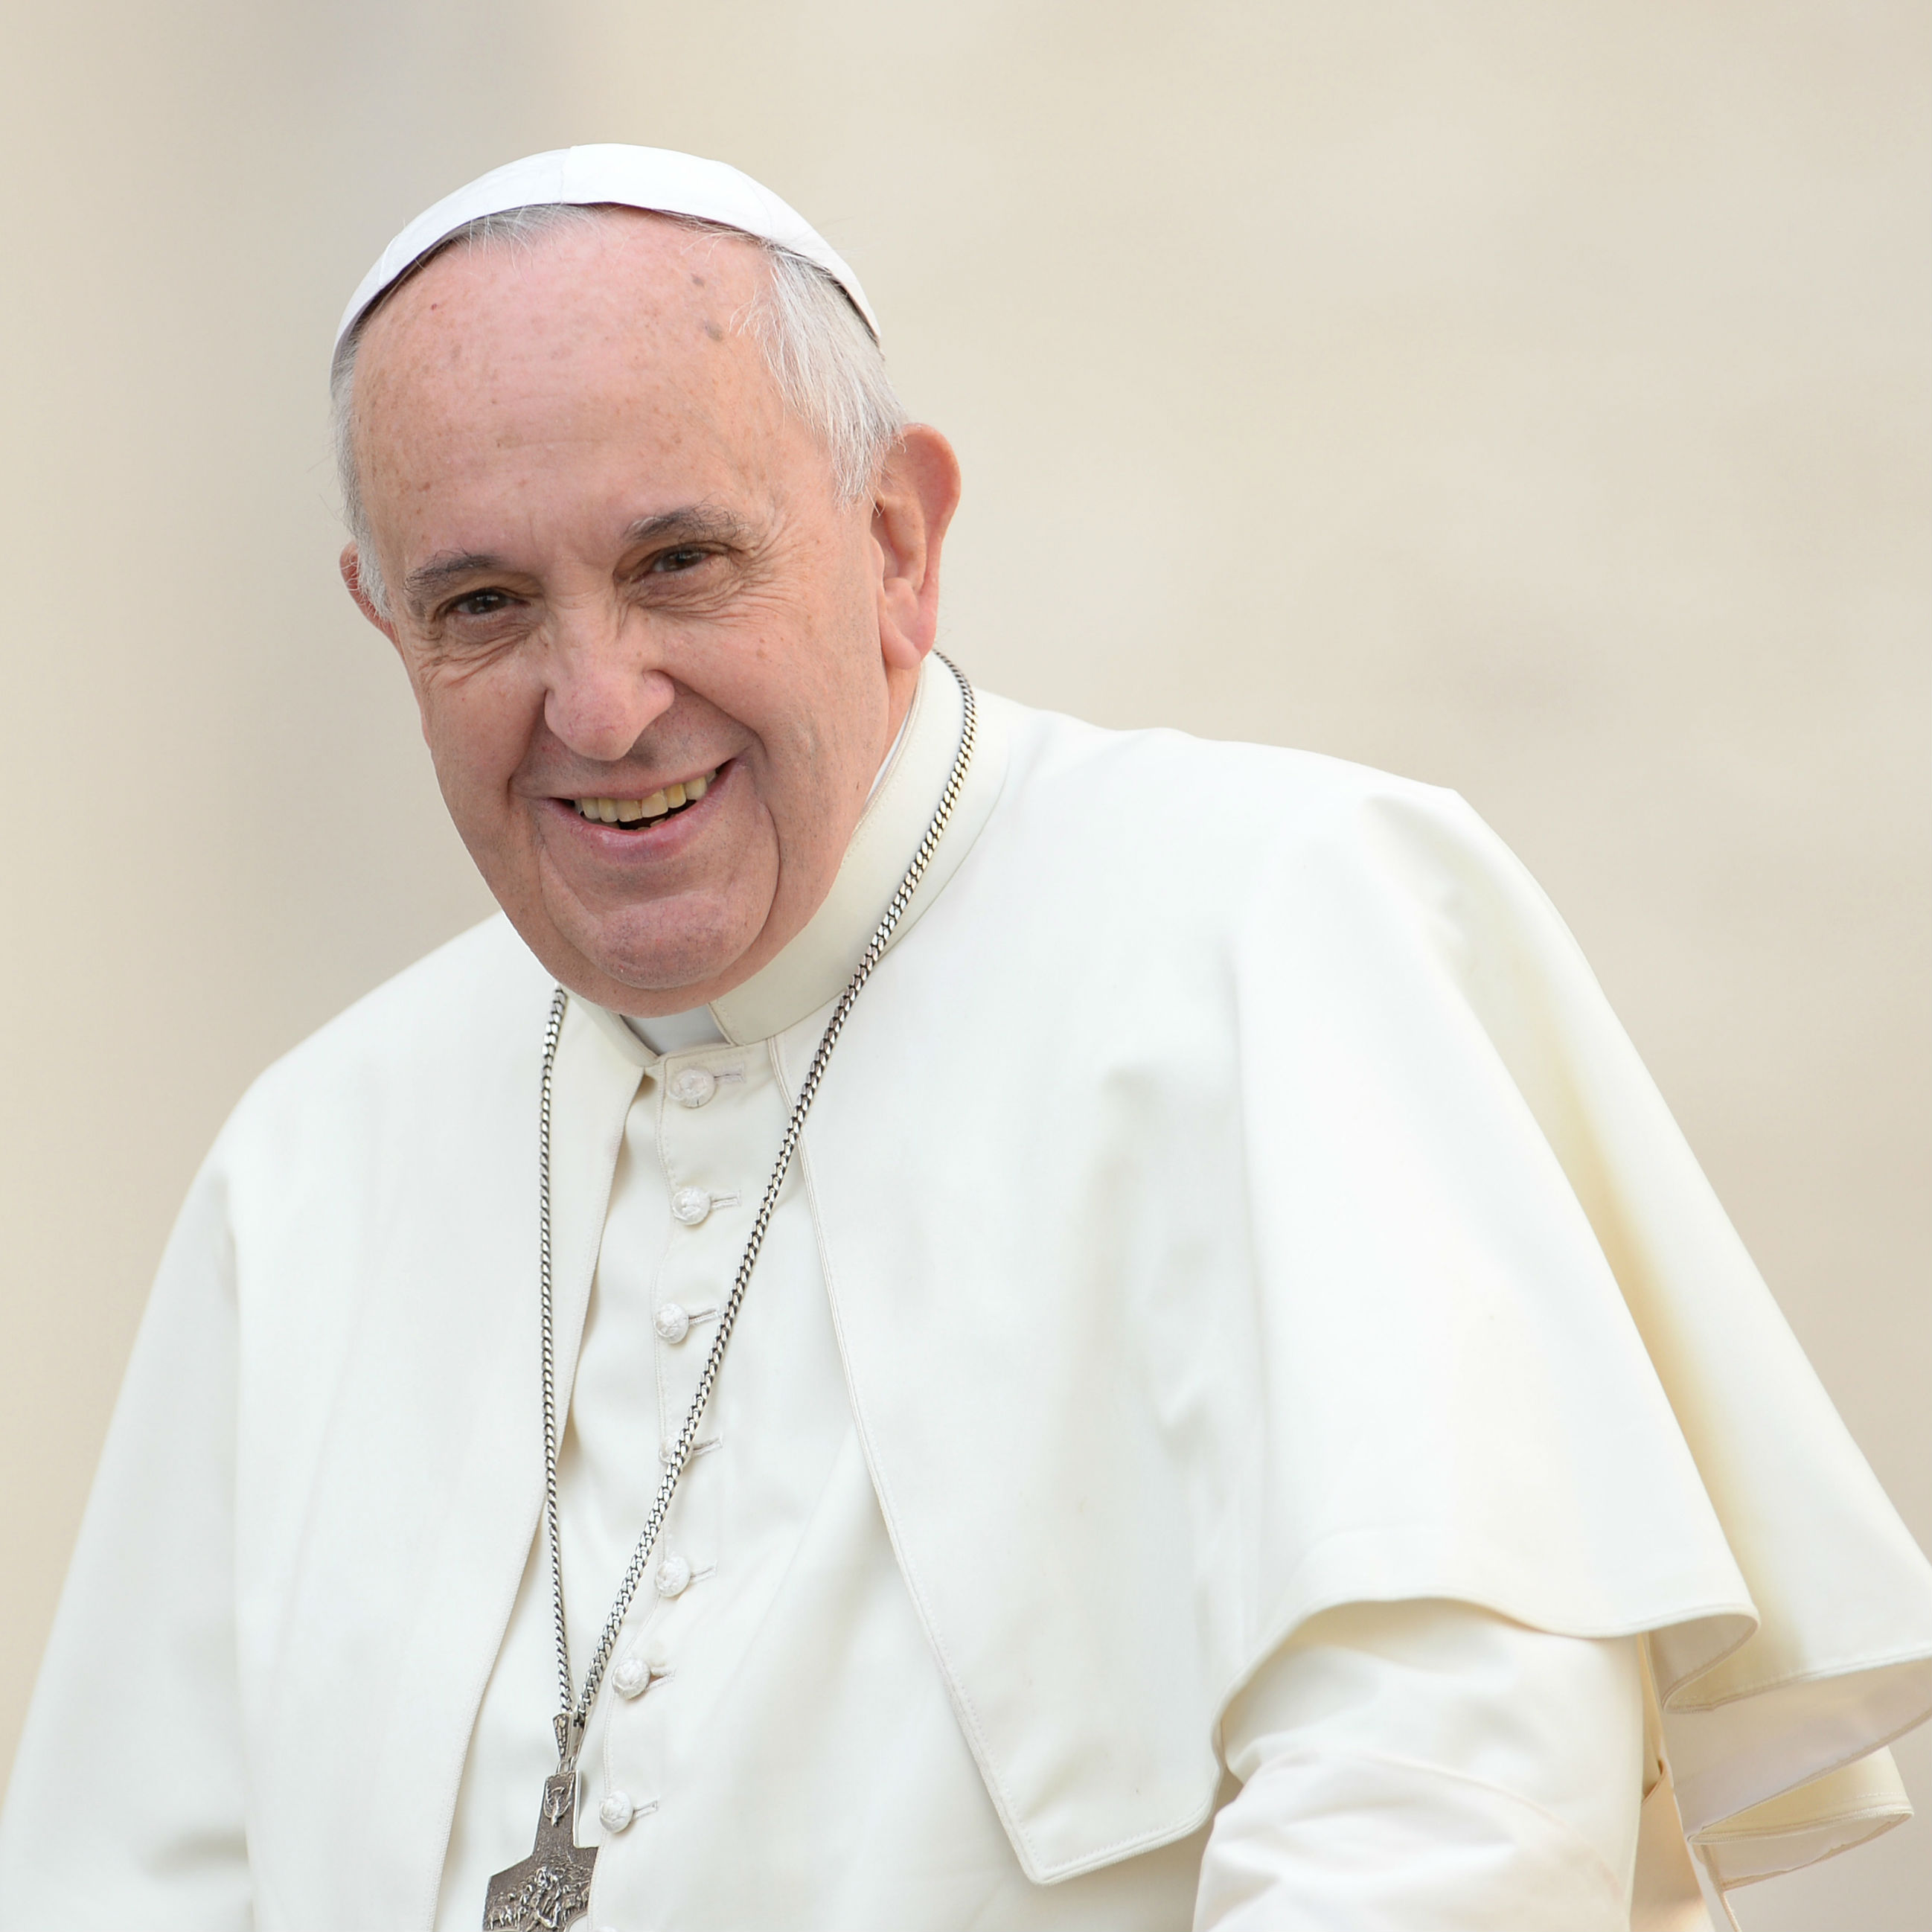 Pope Francis asks Christians to pray for him ahead of trip to meet refugees